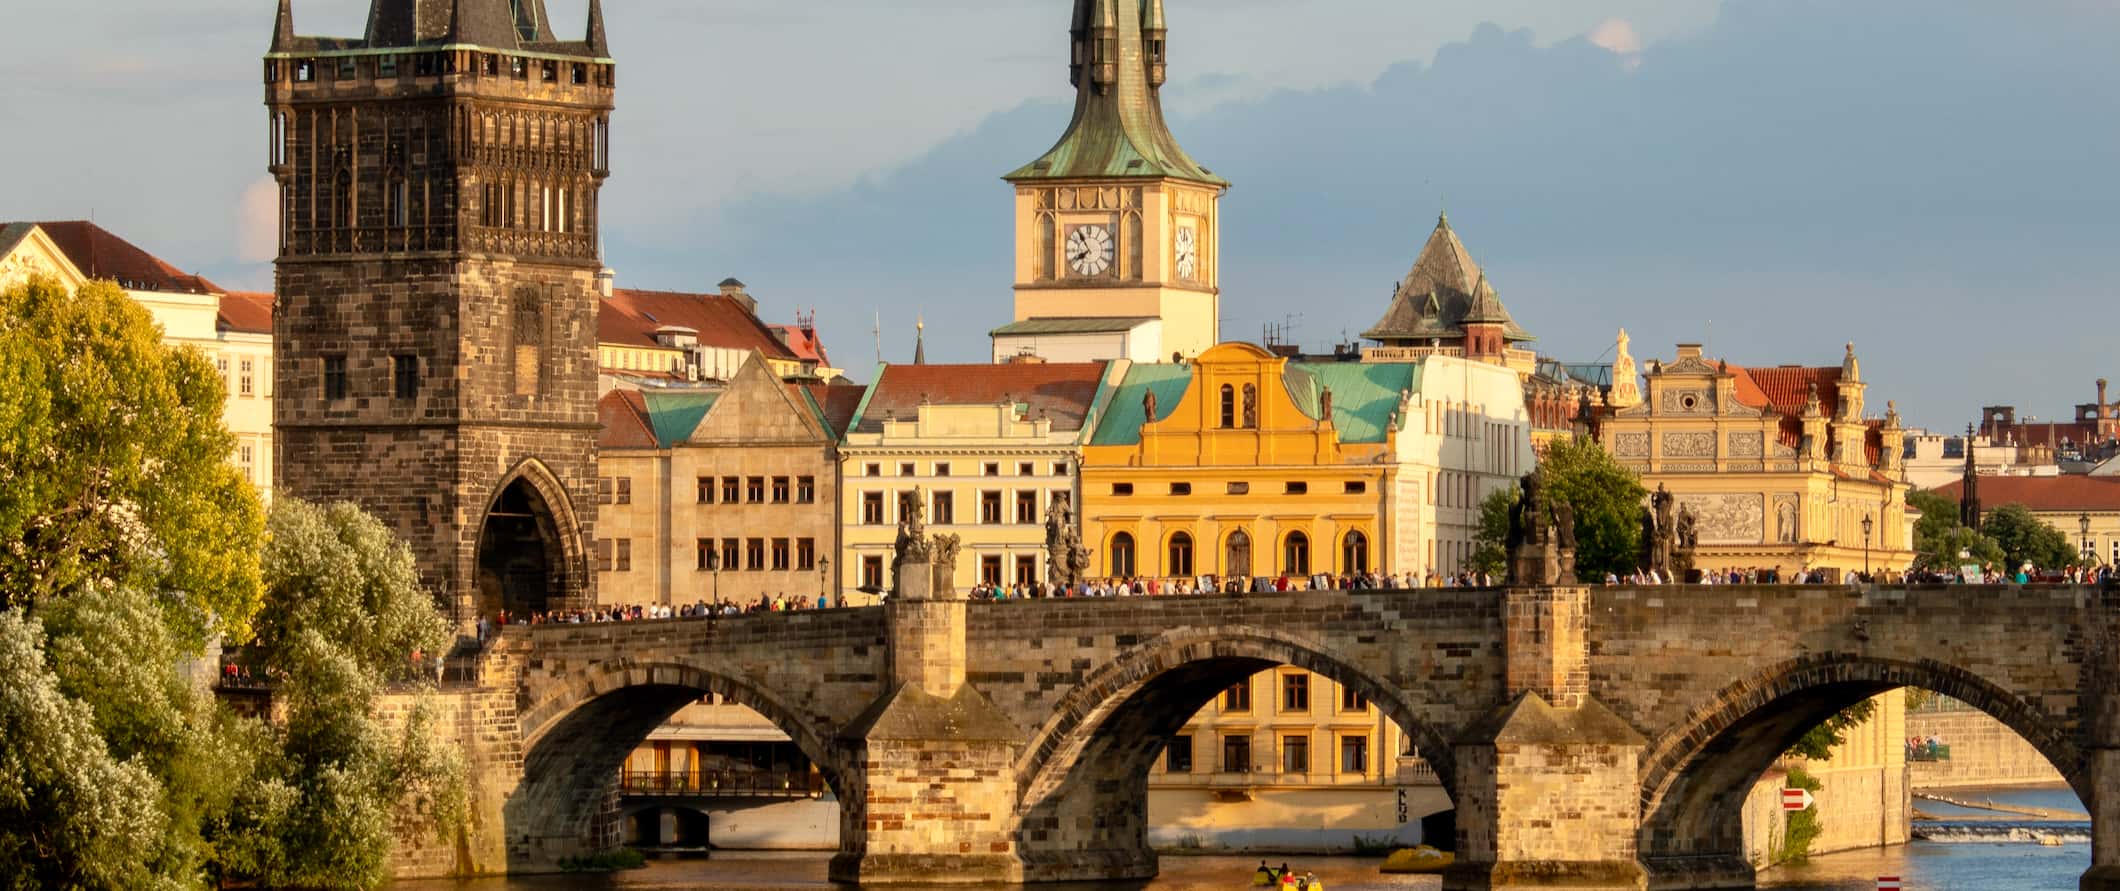 Gritty old buildings and bridges in historic Prague, Czech Republic